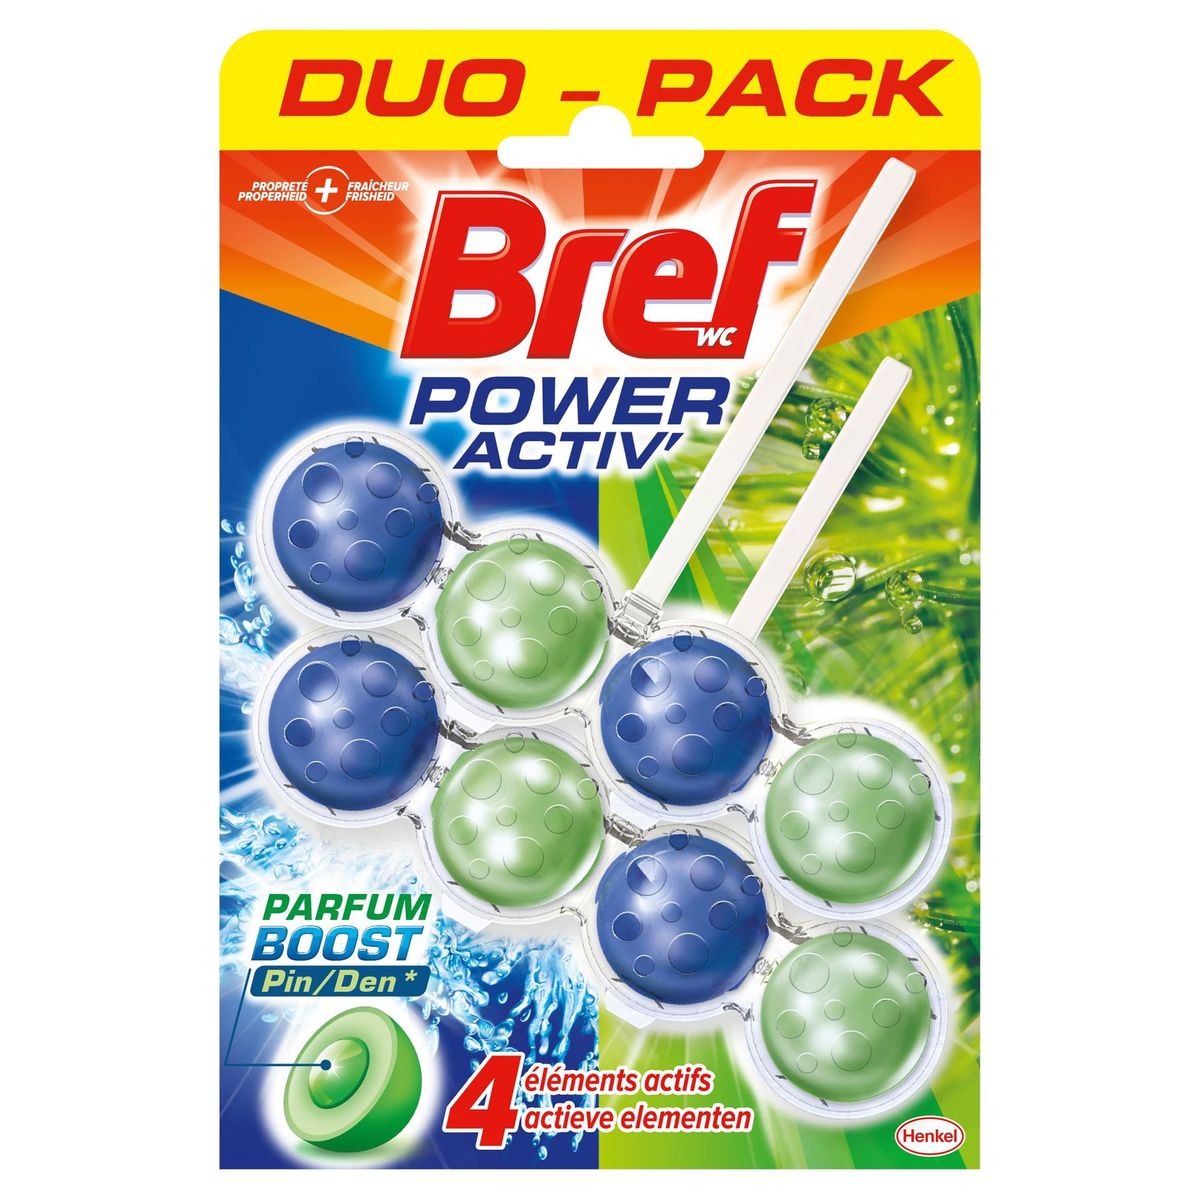 Bref WC Power Activ' Parfum Boost Pin Duo Pack 2 x 50 g